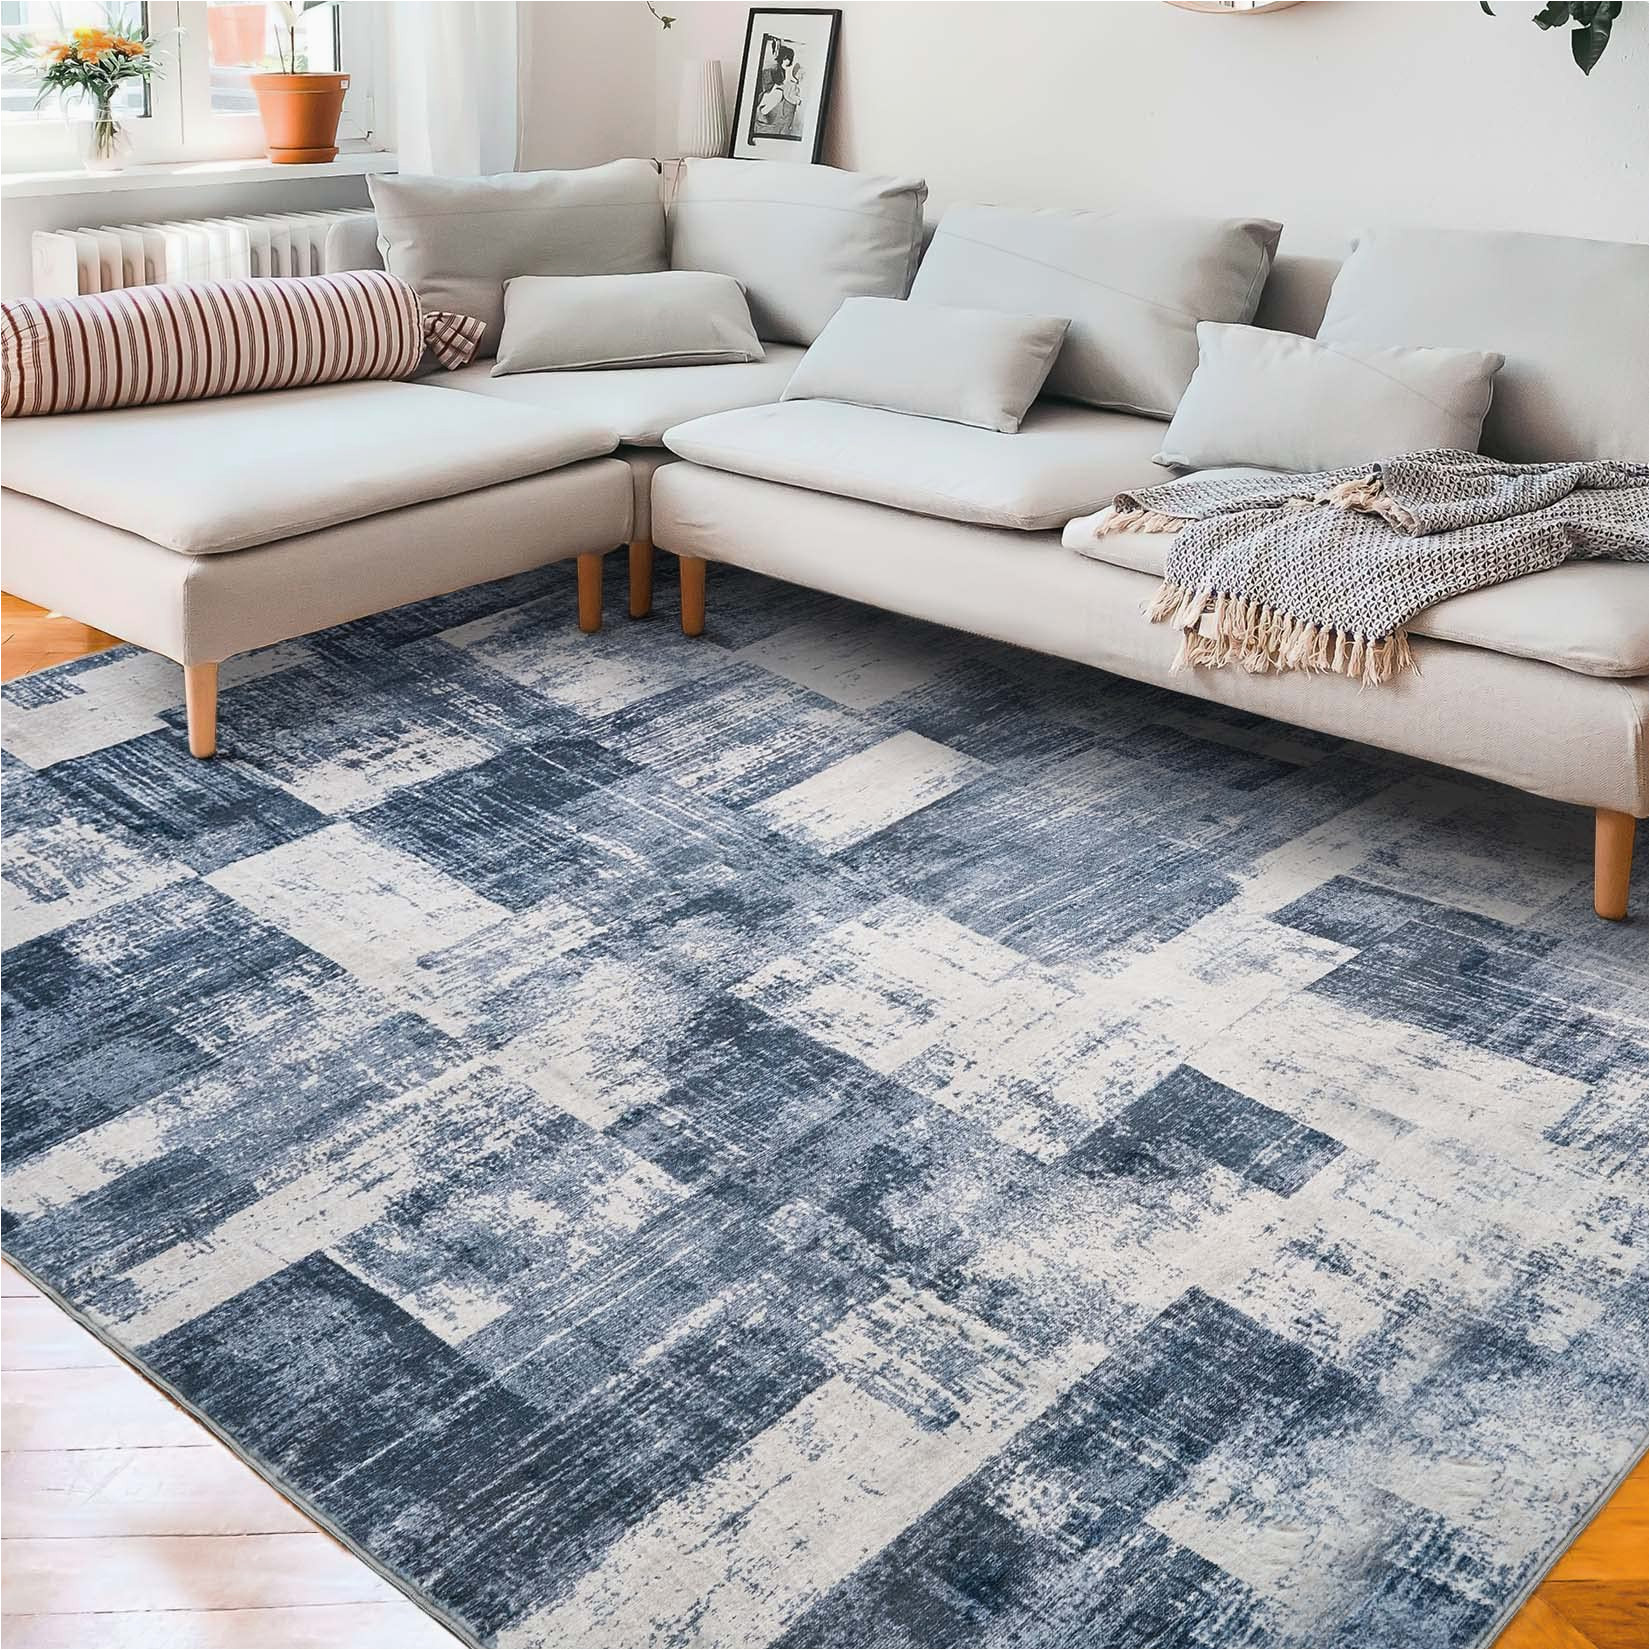 Large Low Pile area Rugs area Rug Living Room Rugs: Indoor soft Low Shaggy Fluffy Pile Carpet Abstract Decor Large Washable for Bedroom Dining Room Under Kitchen Table Home …